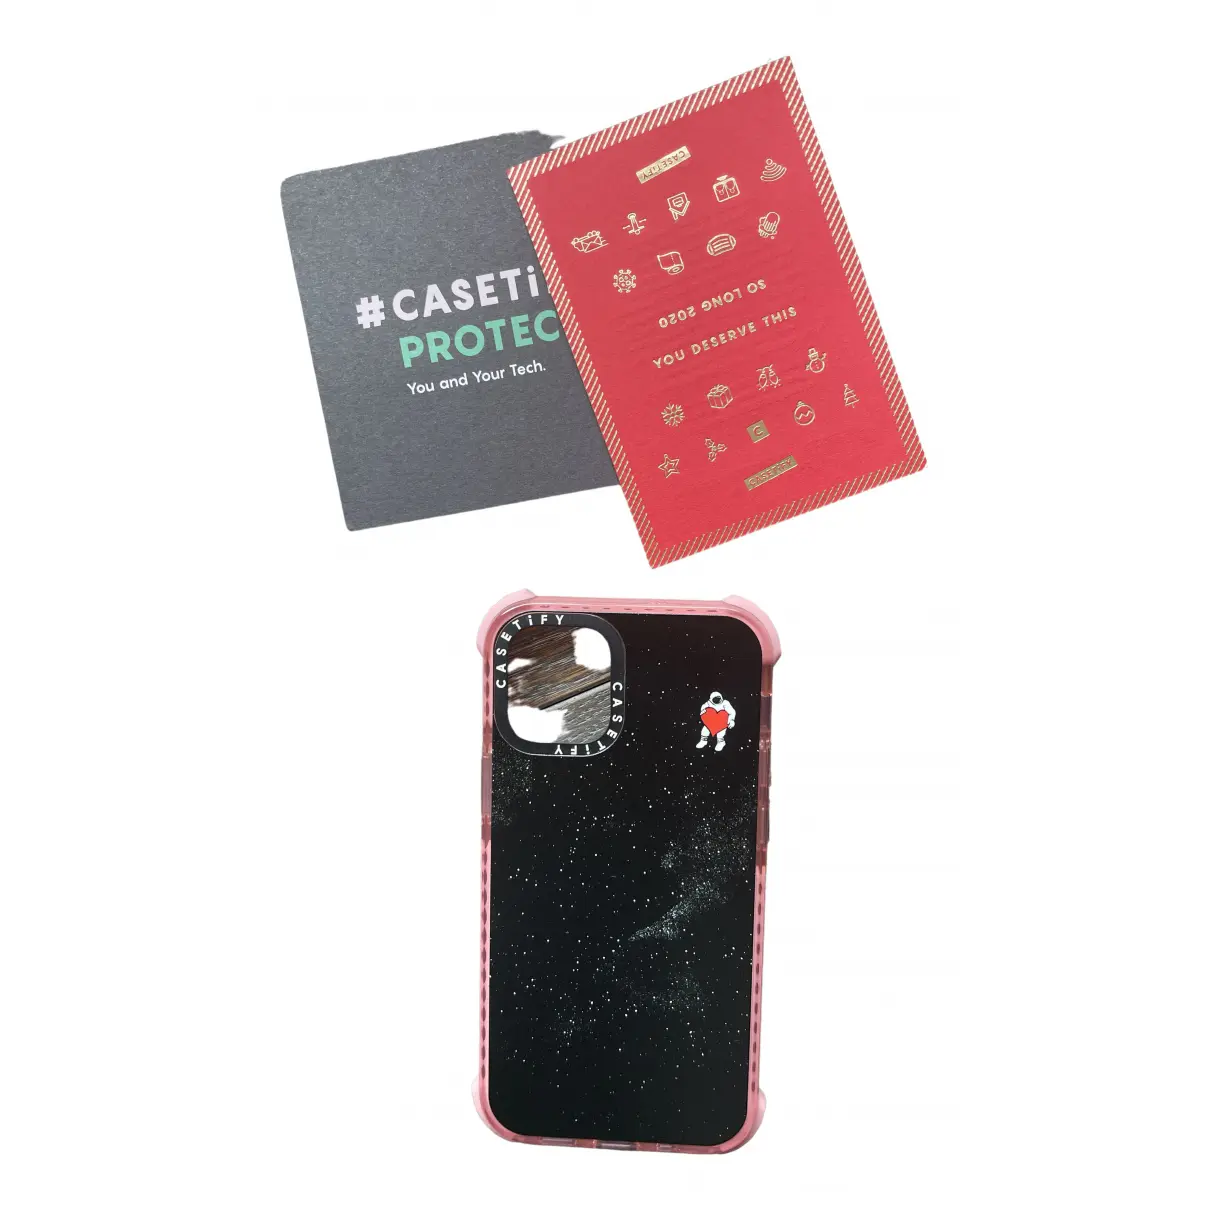 Iphone case Casetify